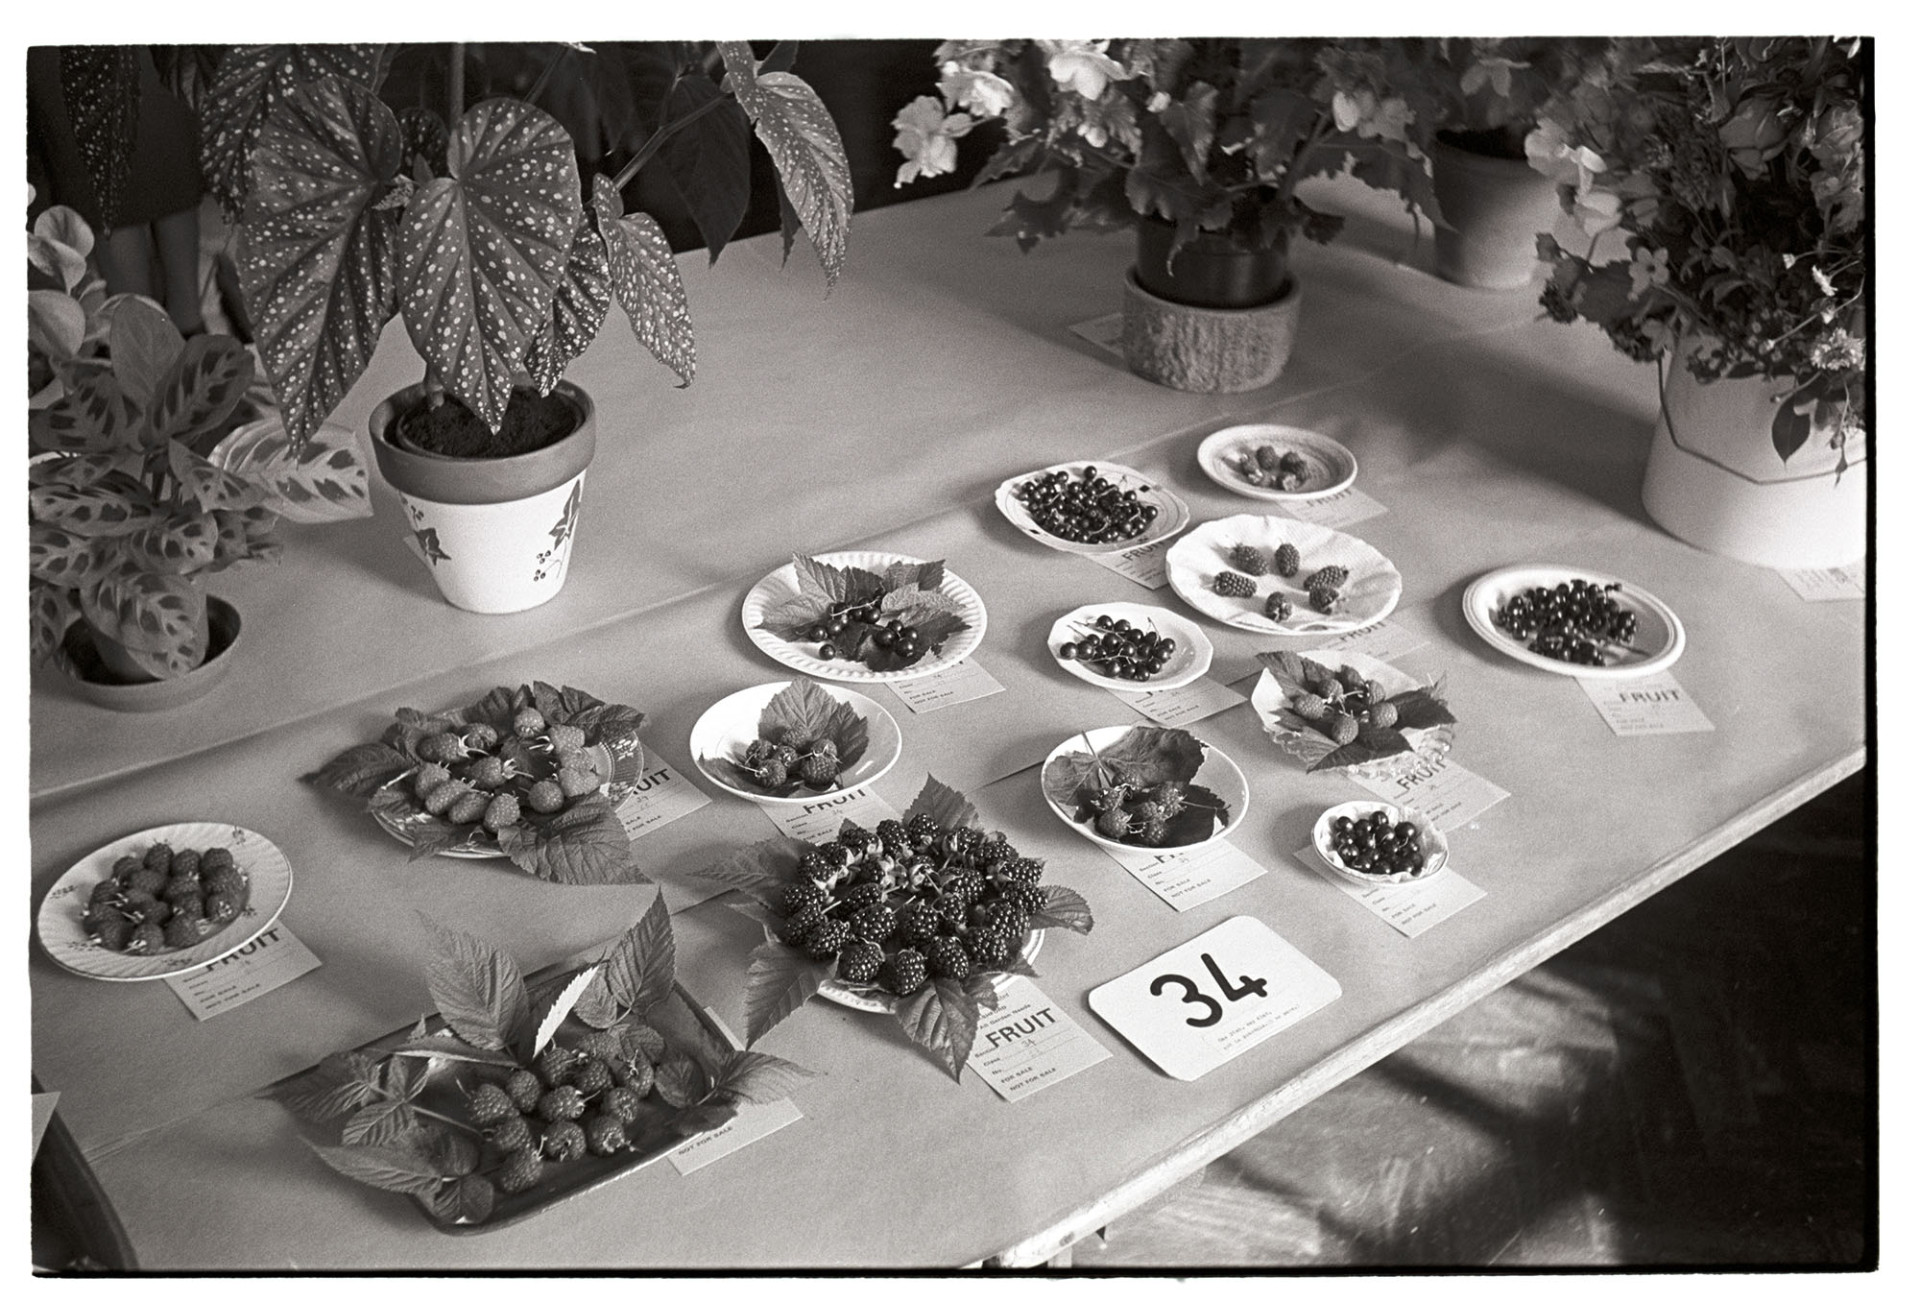 Flower show, display of fruit, strawberries and raspberries. 
[Entries of strawberries, raspberries, blackberries and blackcurrants at the Dolton Flower Show in Dolton Village Hall. Pot plants are arranged around the fruit display.]